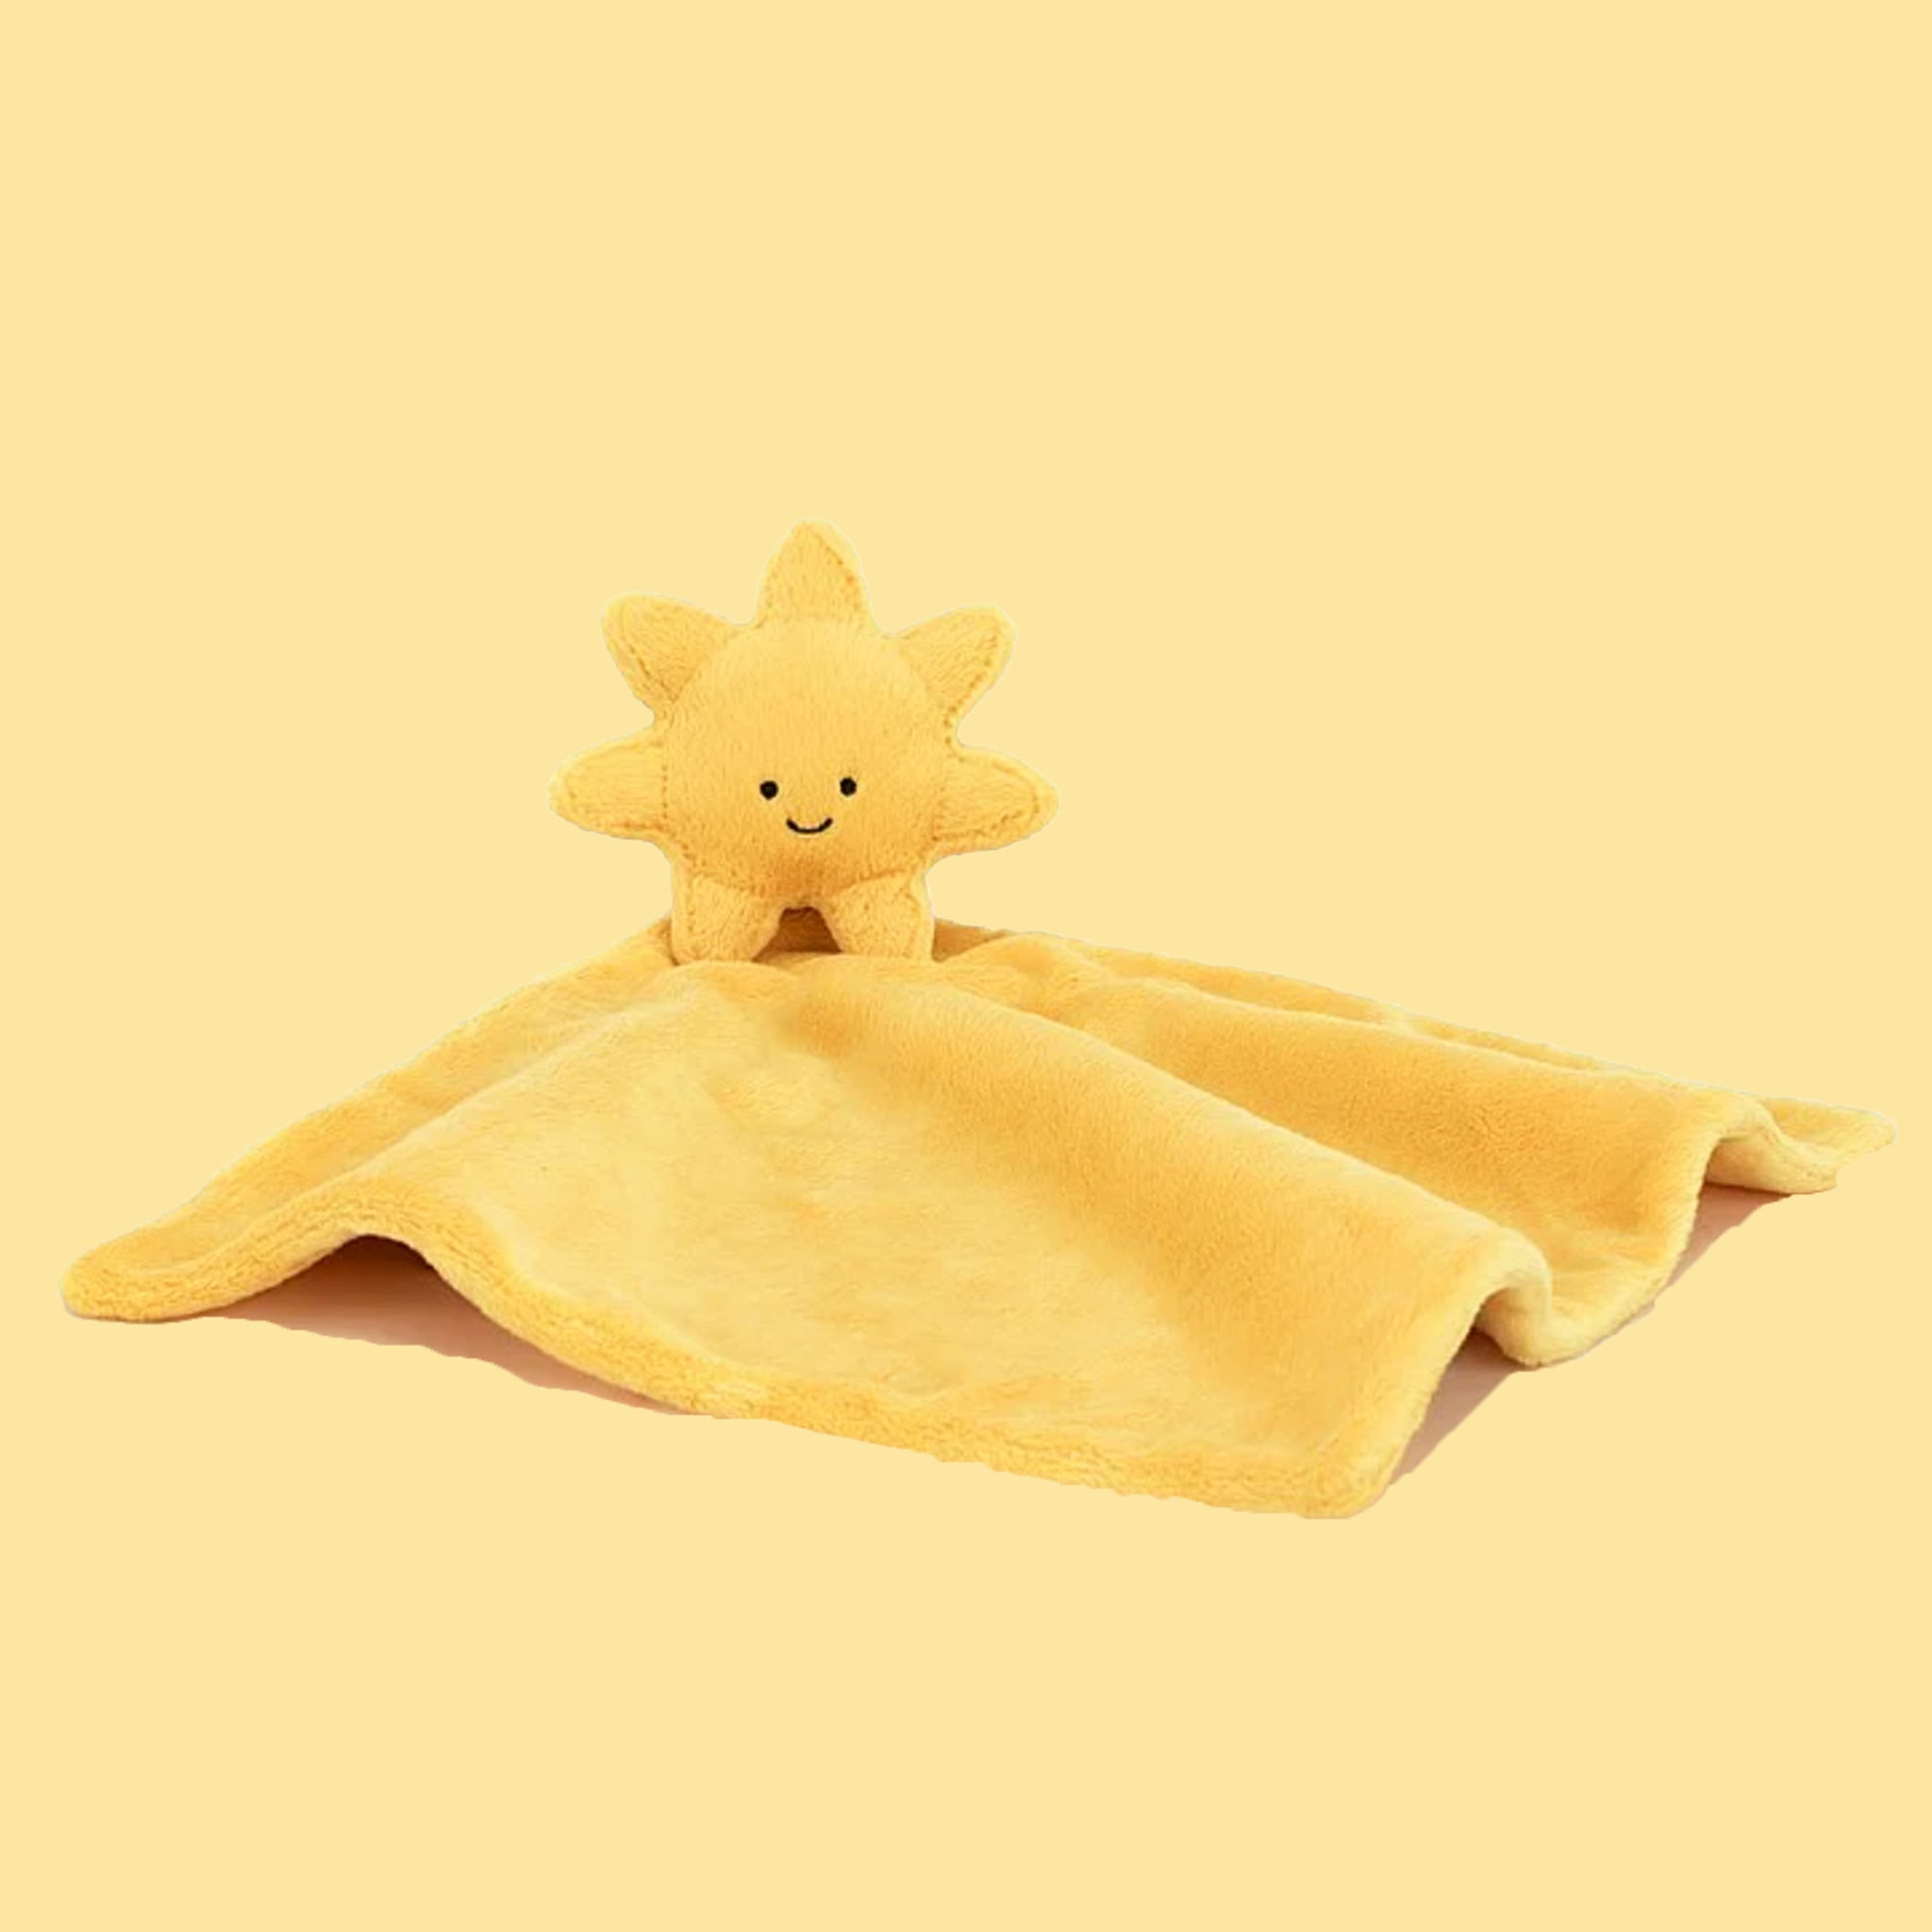 On a yellow background is a yellow sun shaped stuffed toy attached to a square blanket. 